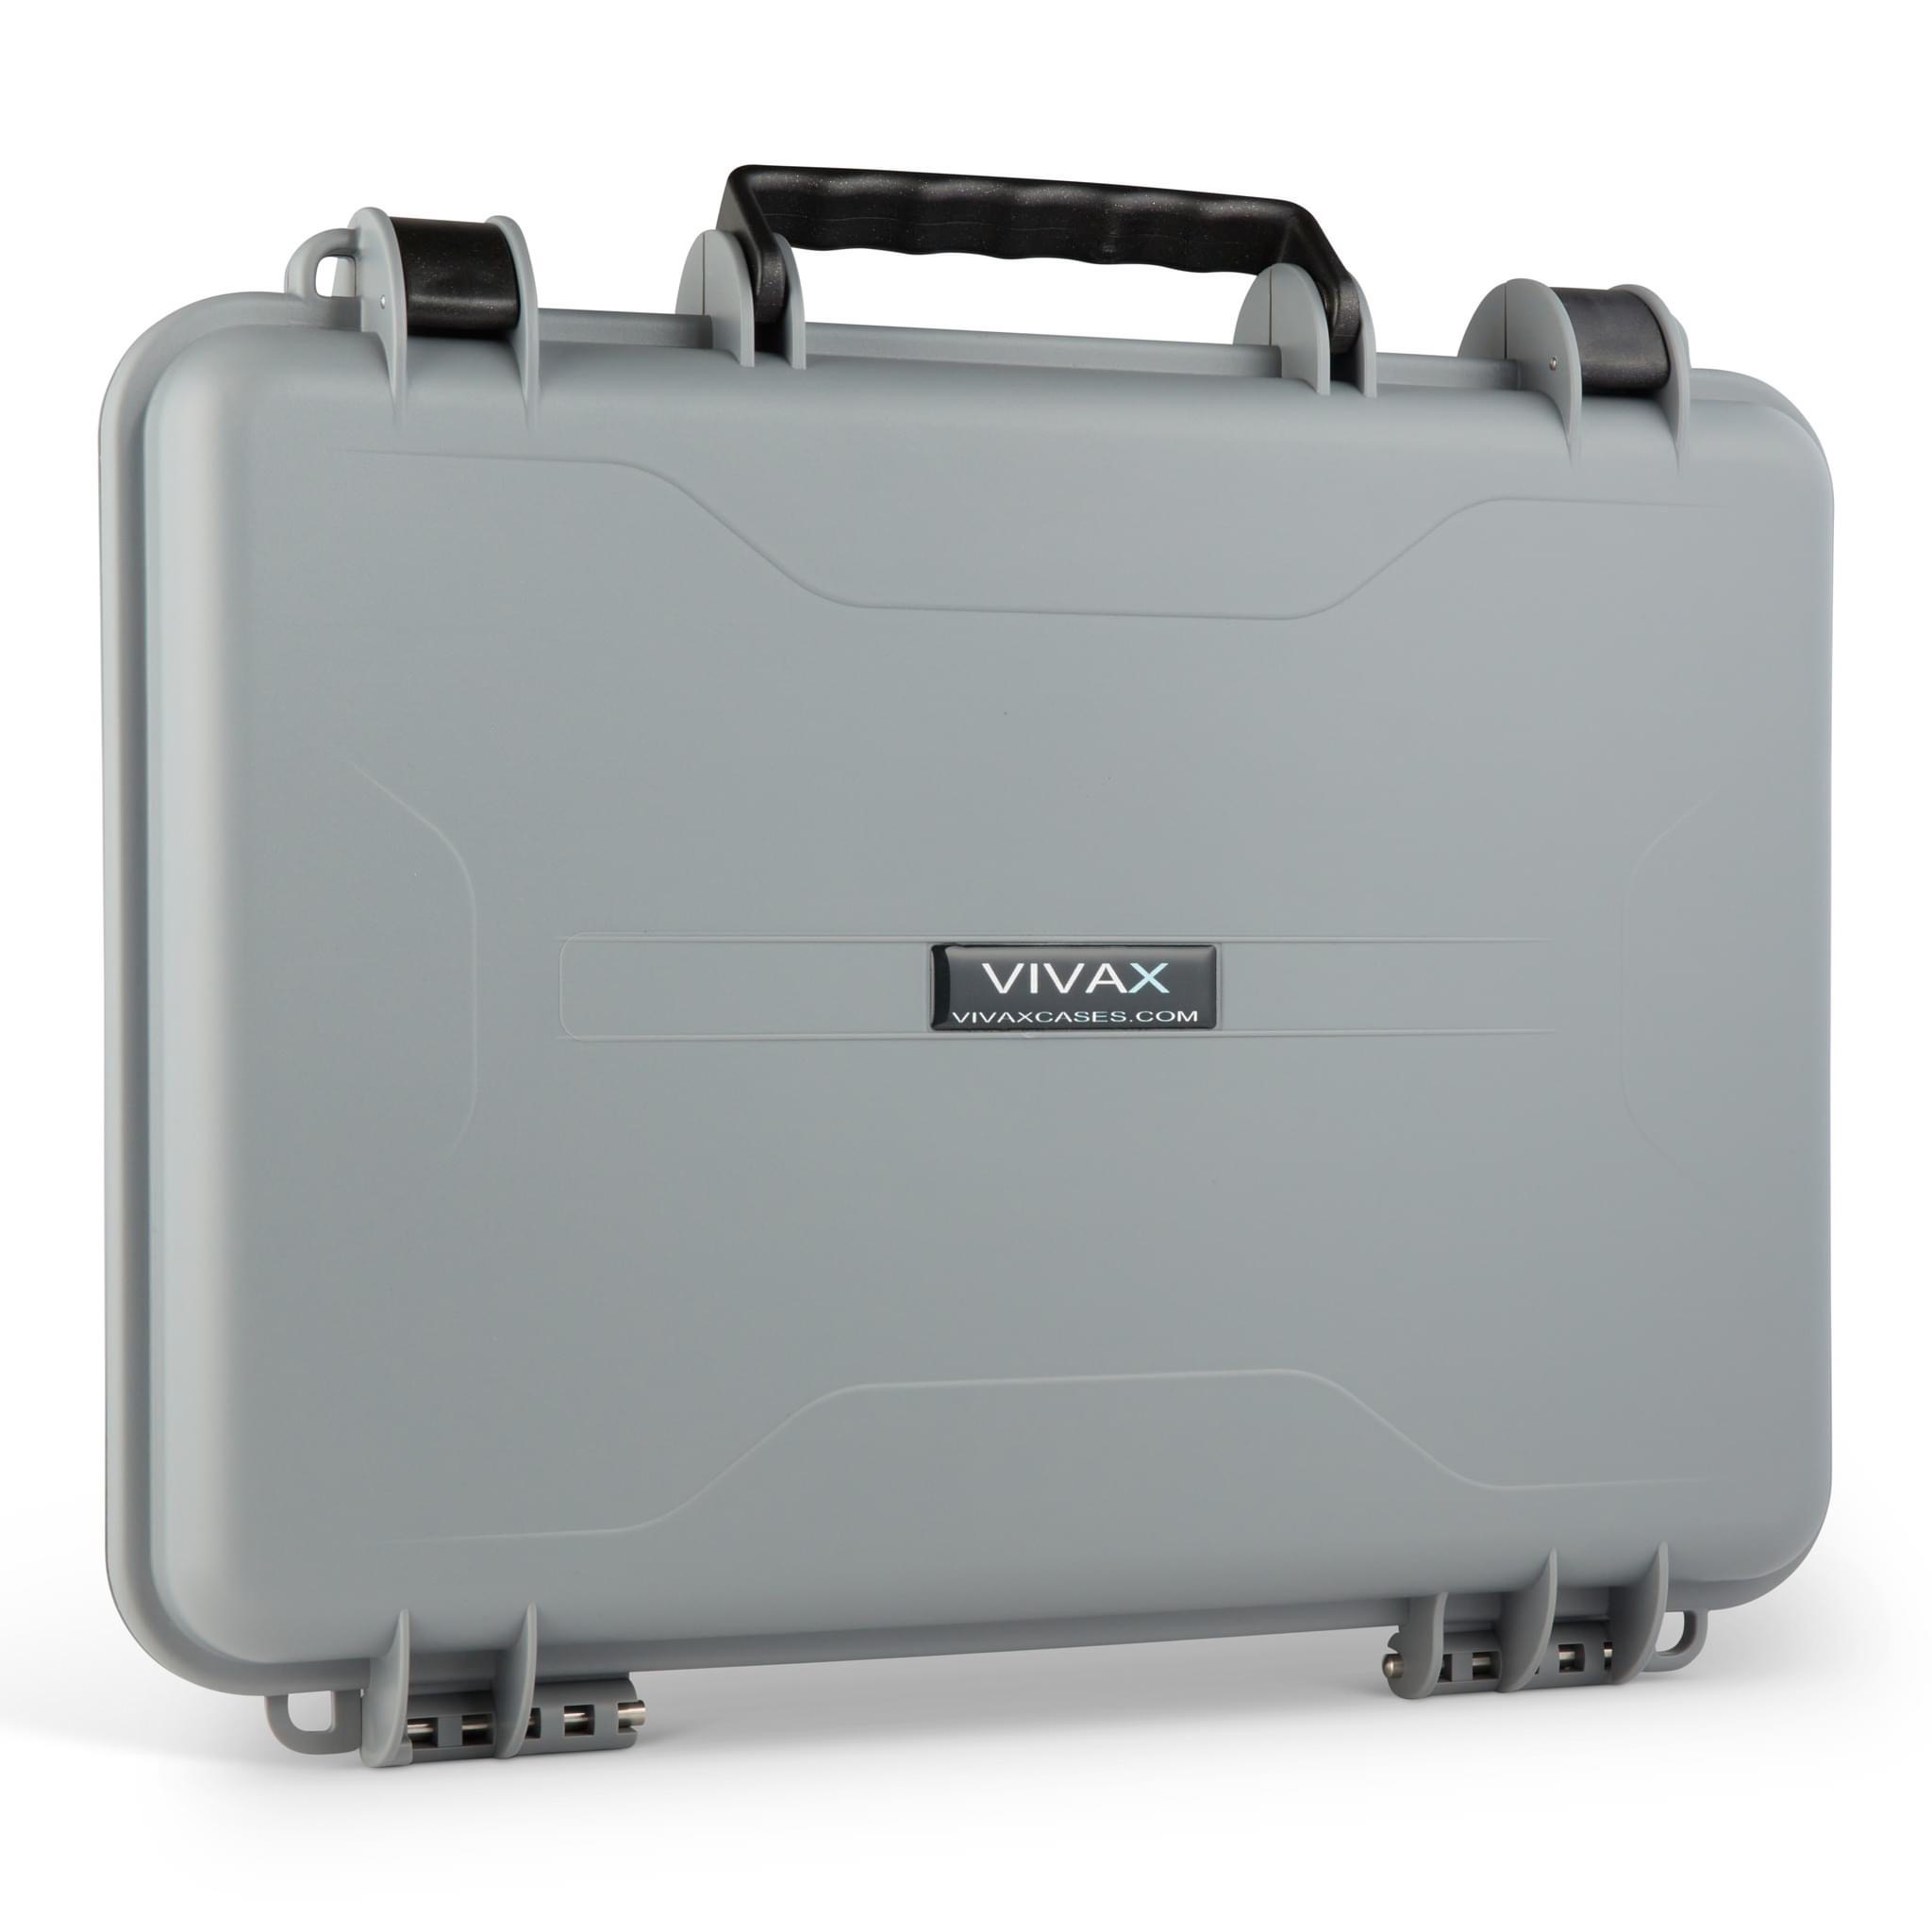 Vivax Laptop Silver for laptops upto 15.6” and Mac Book 16” Pro series  